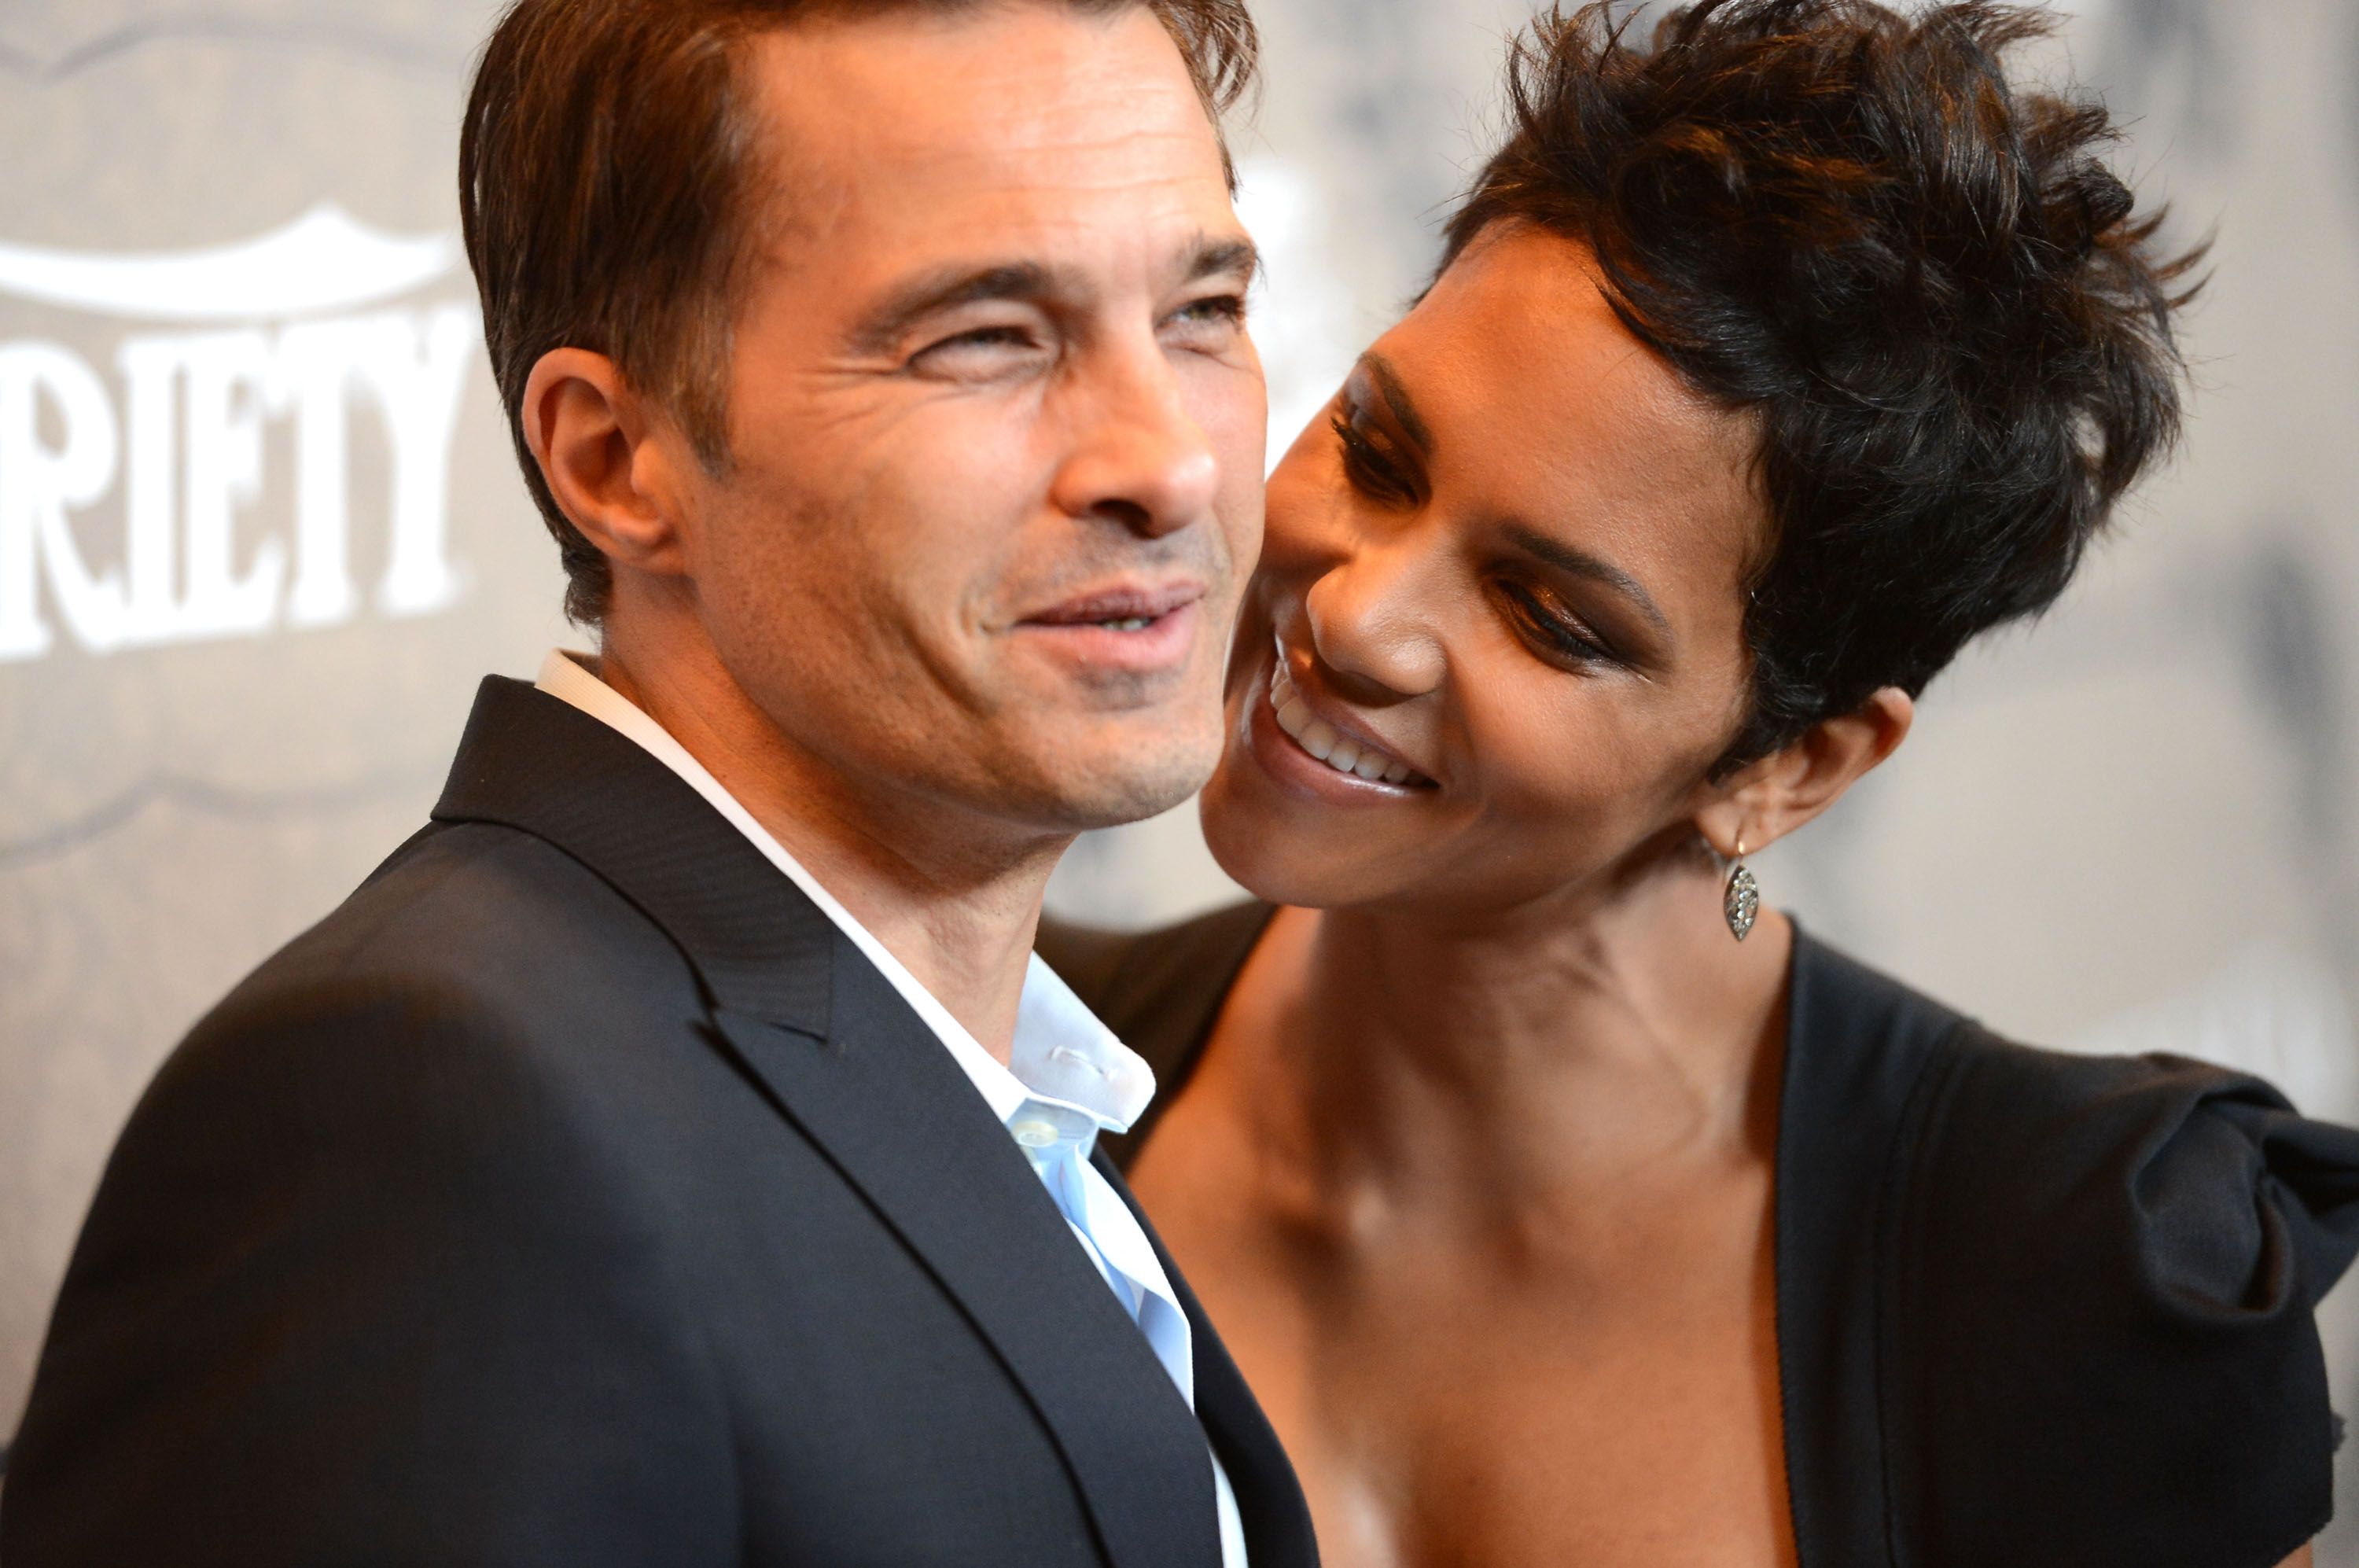 Olivier Martinez and Halle Berry on October 5, 2012 in Beverly Hills, California. | Source: Getty Images